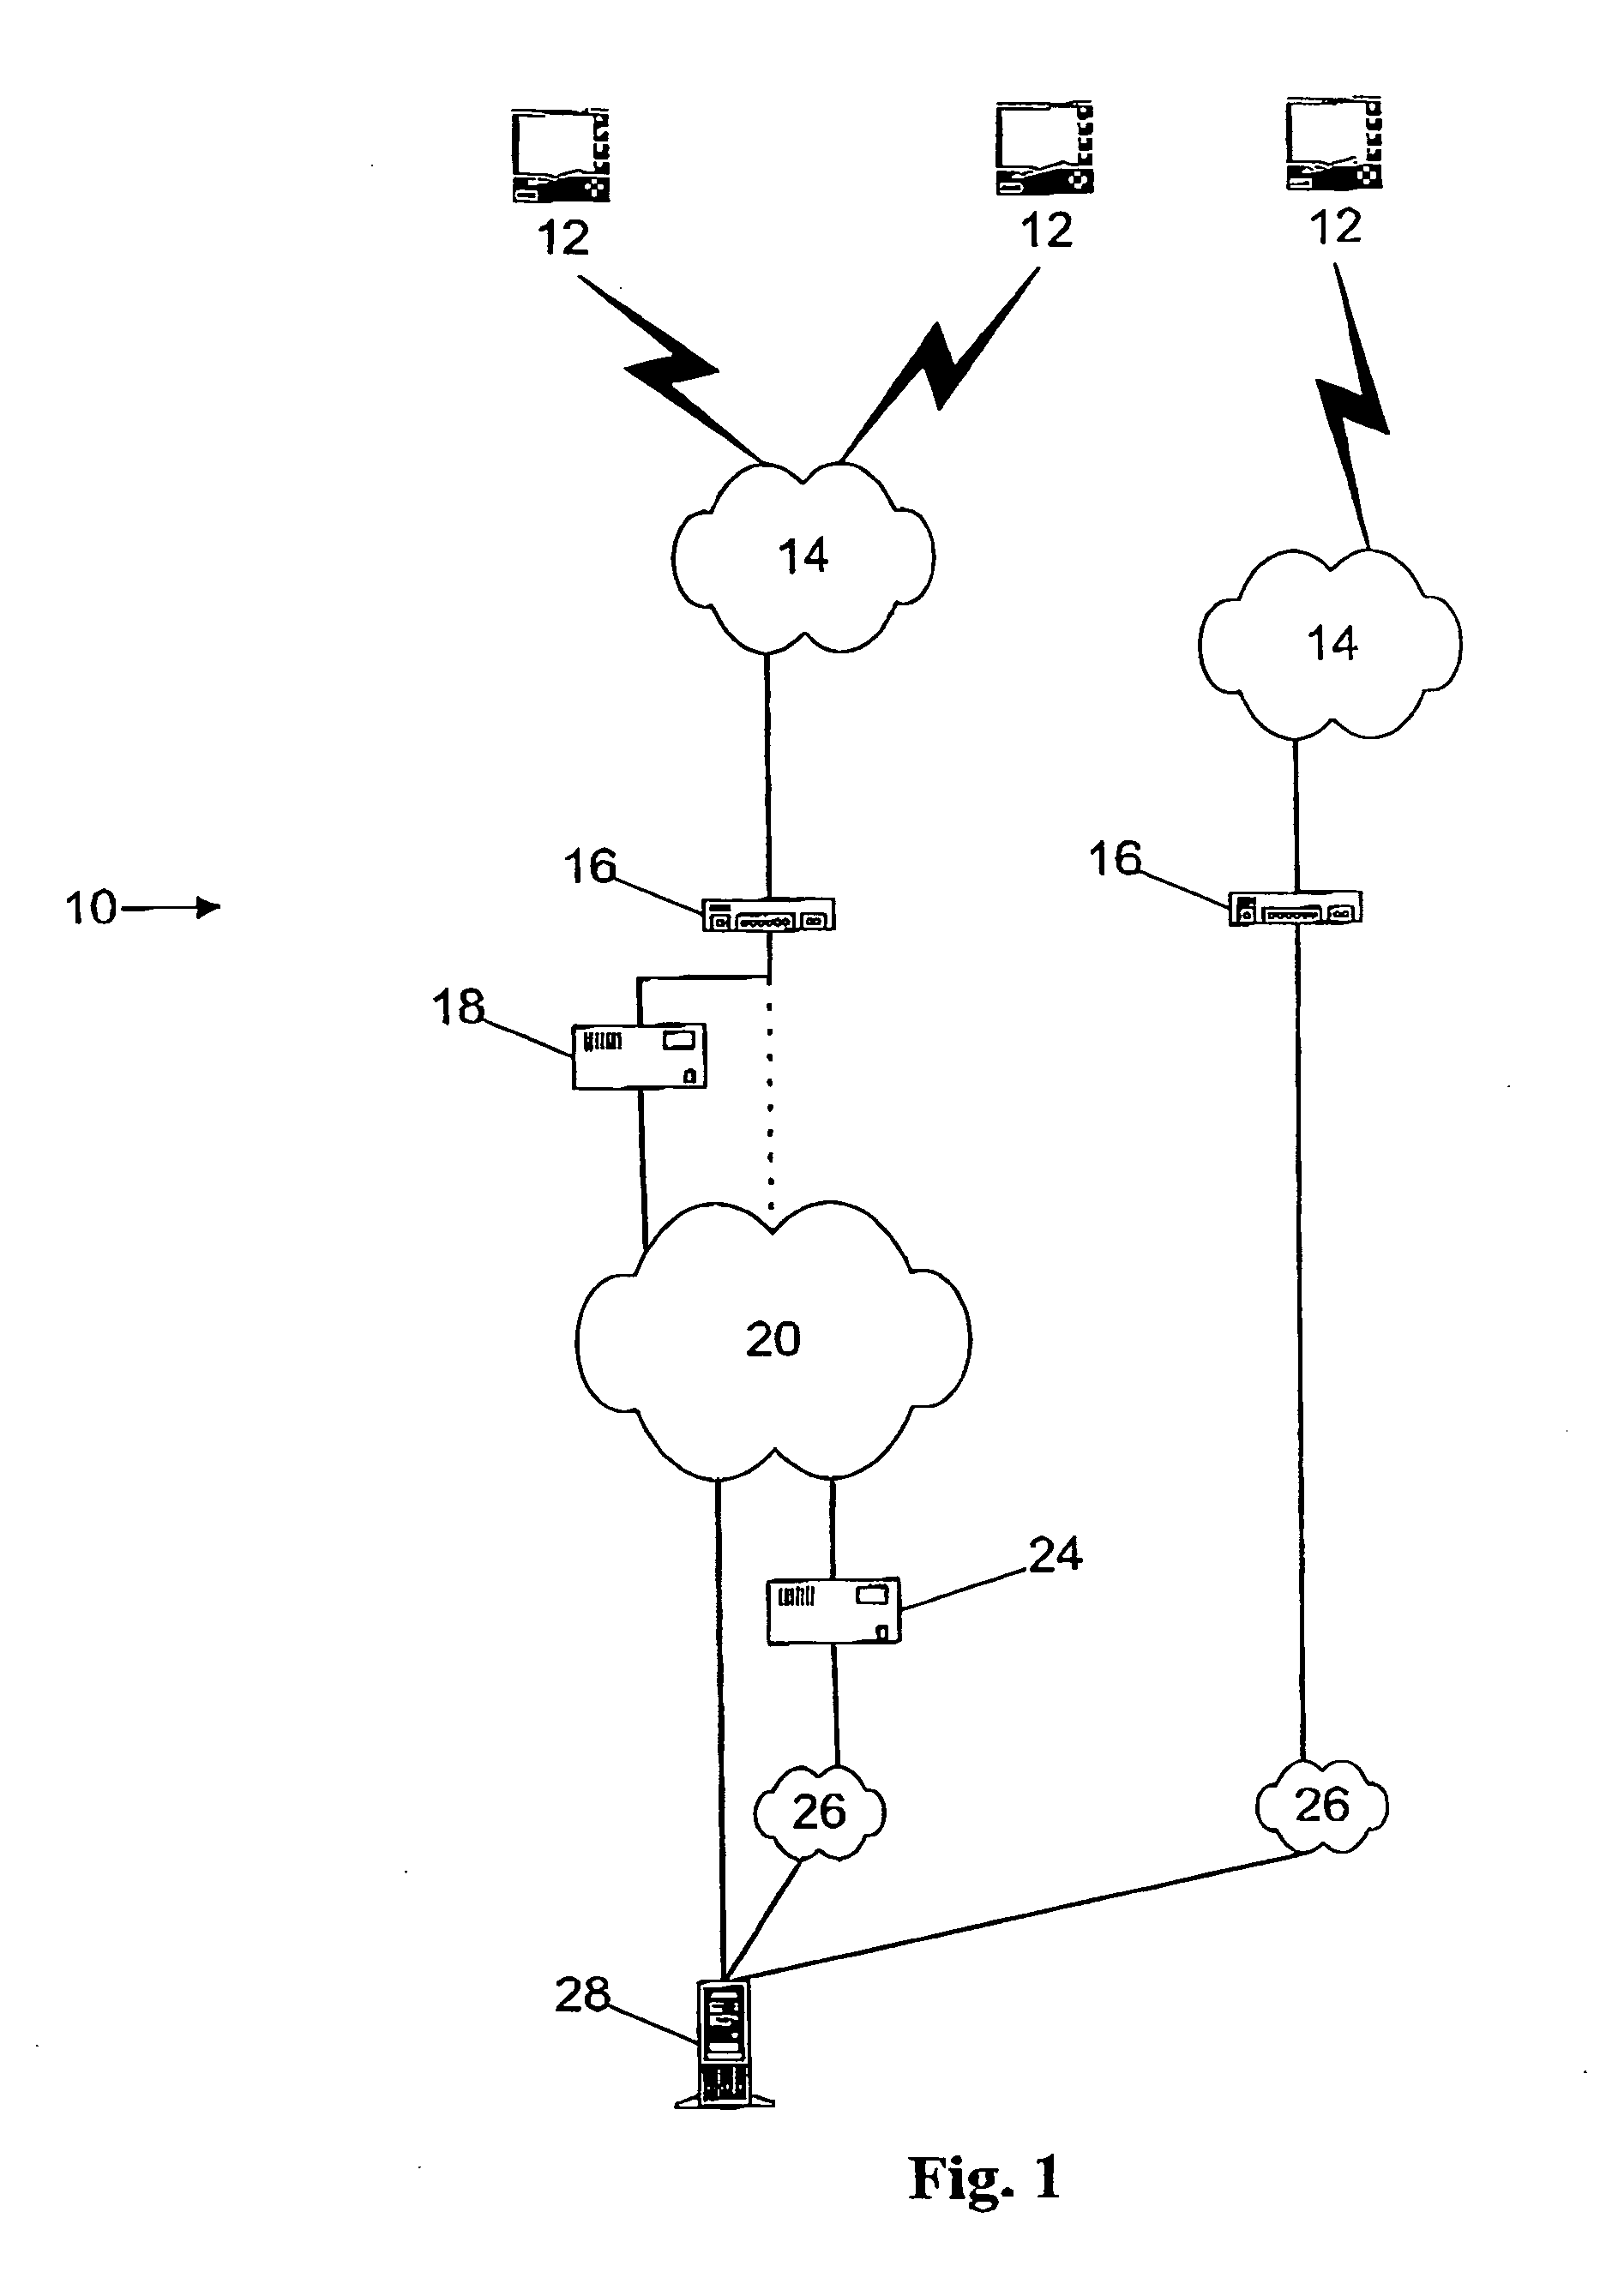 Method for viewing document information on a mobile communication device